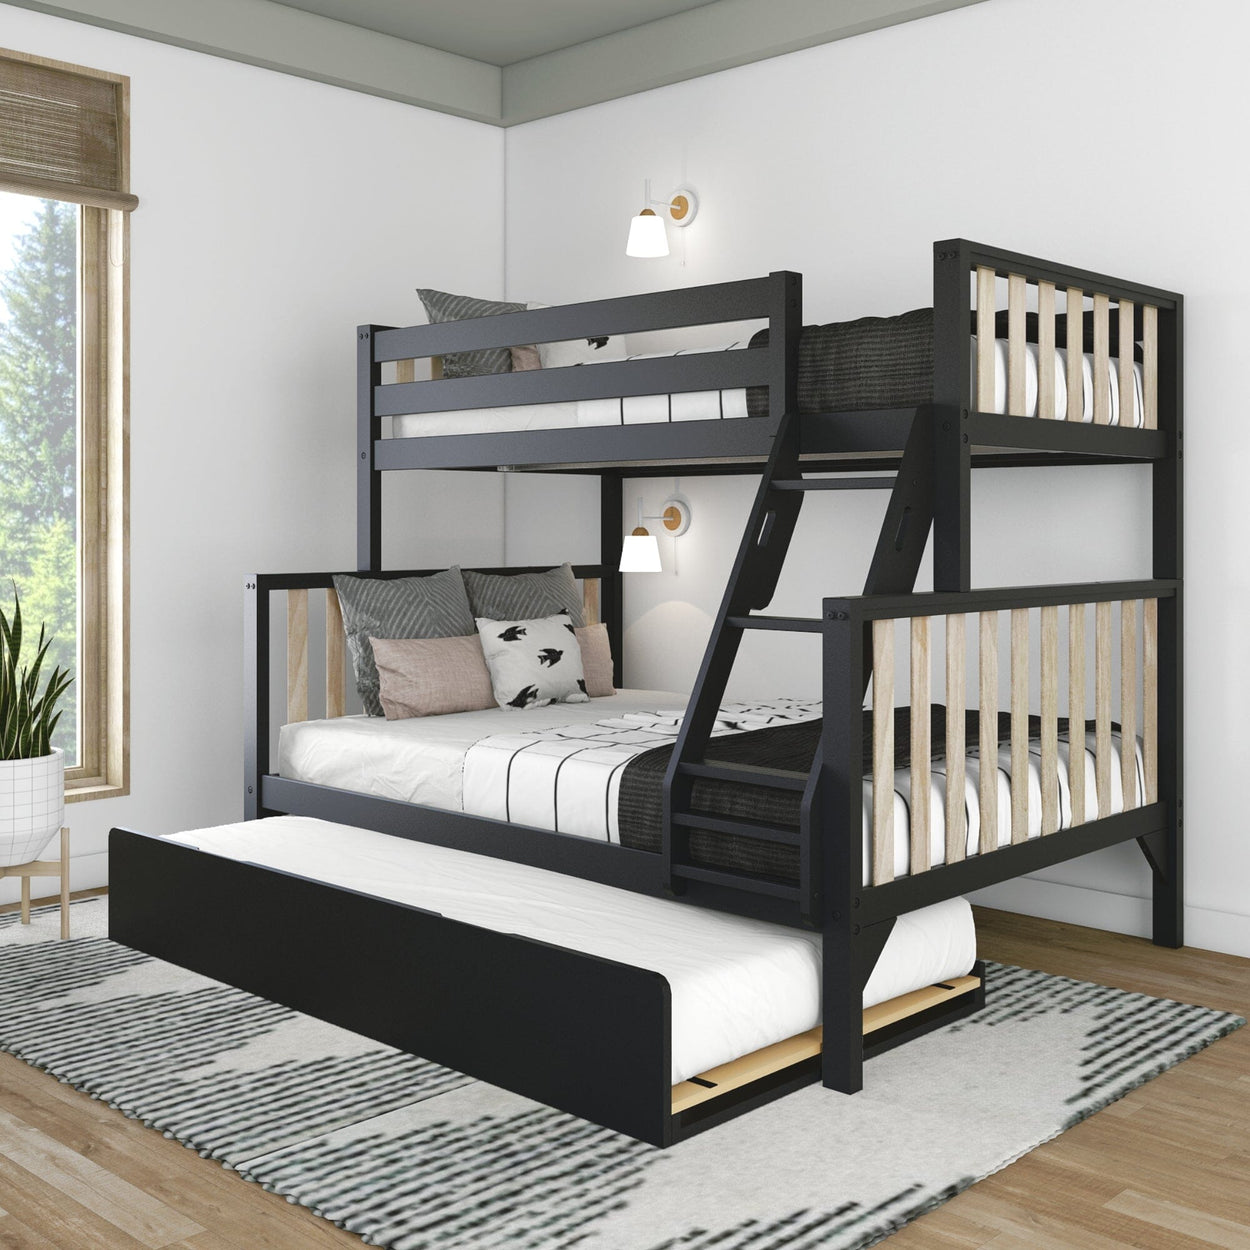 216231-272 : Bunk Beds Scandinavian Twin over Full Bunk Bed with Twin-Size Trundle, Black/Blonde